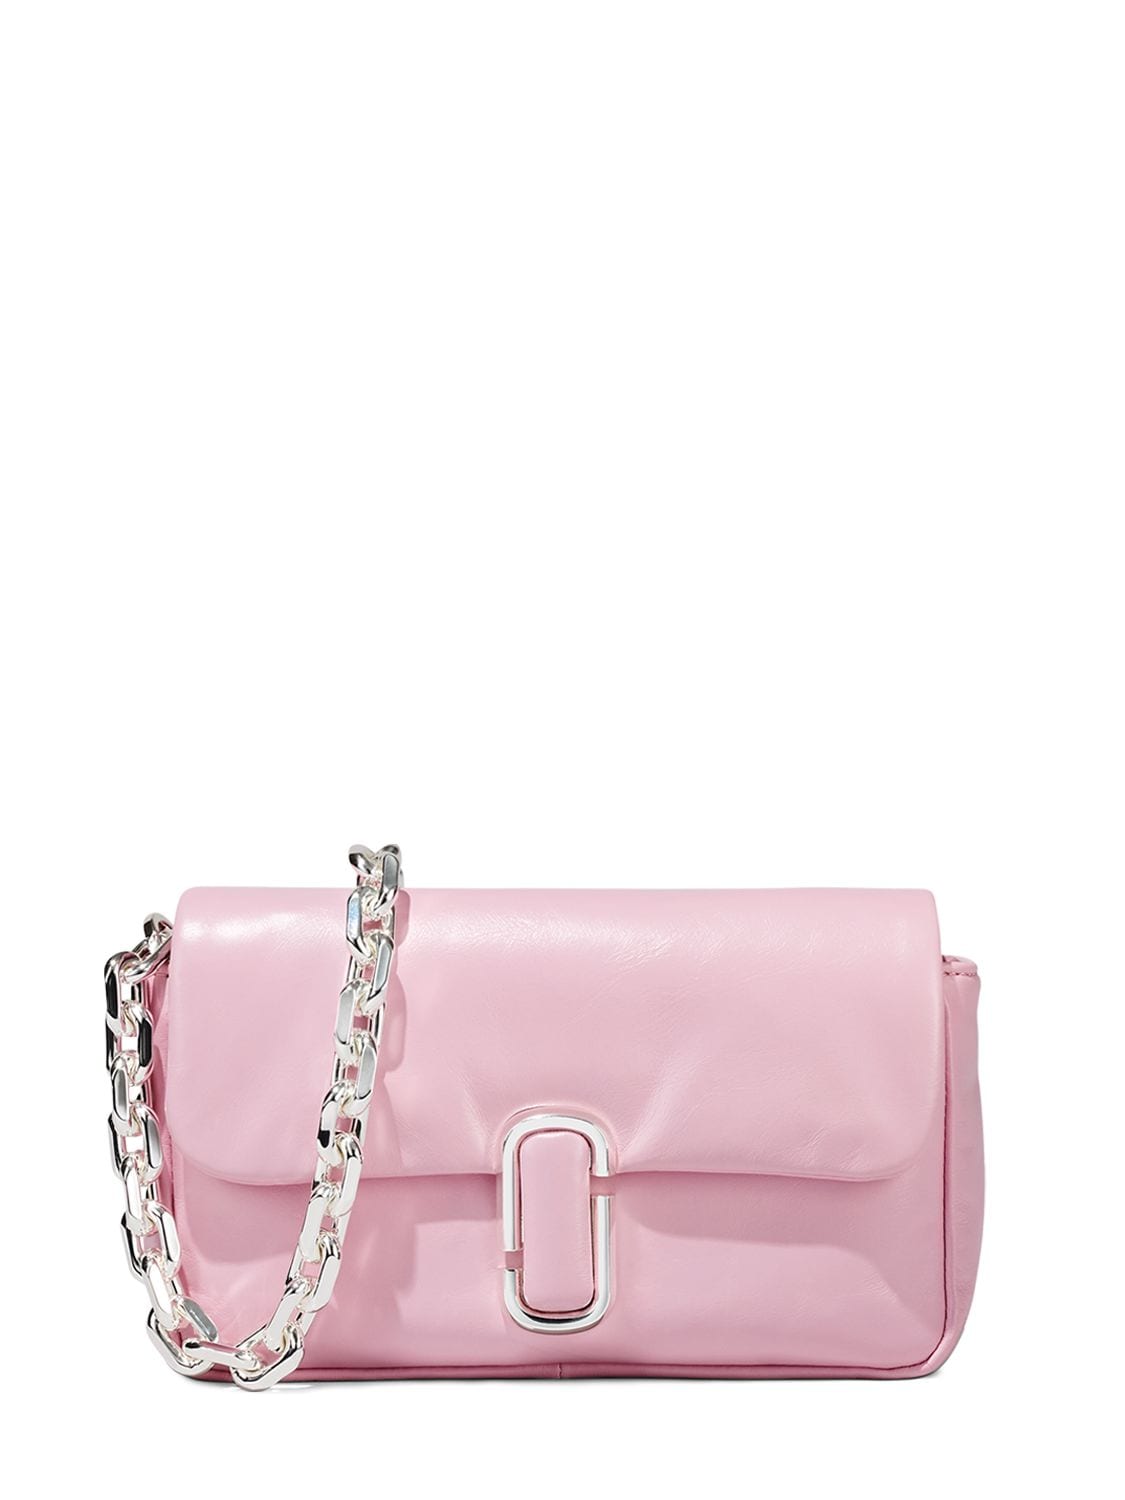 Marc Jacobs The Mini Pillow Shoulder Bag In Bubblegum Leather in